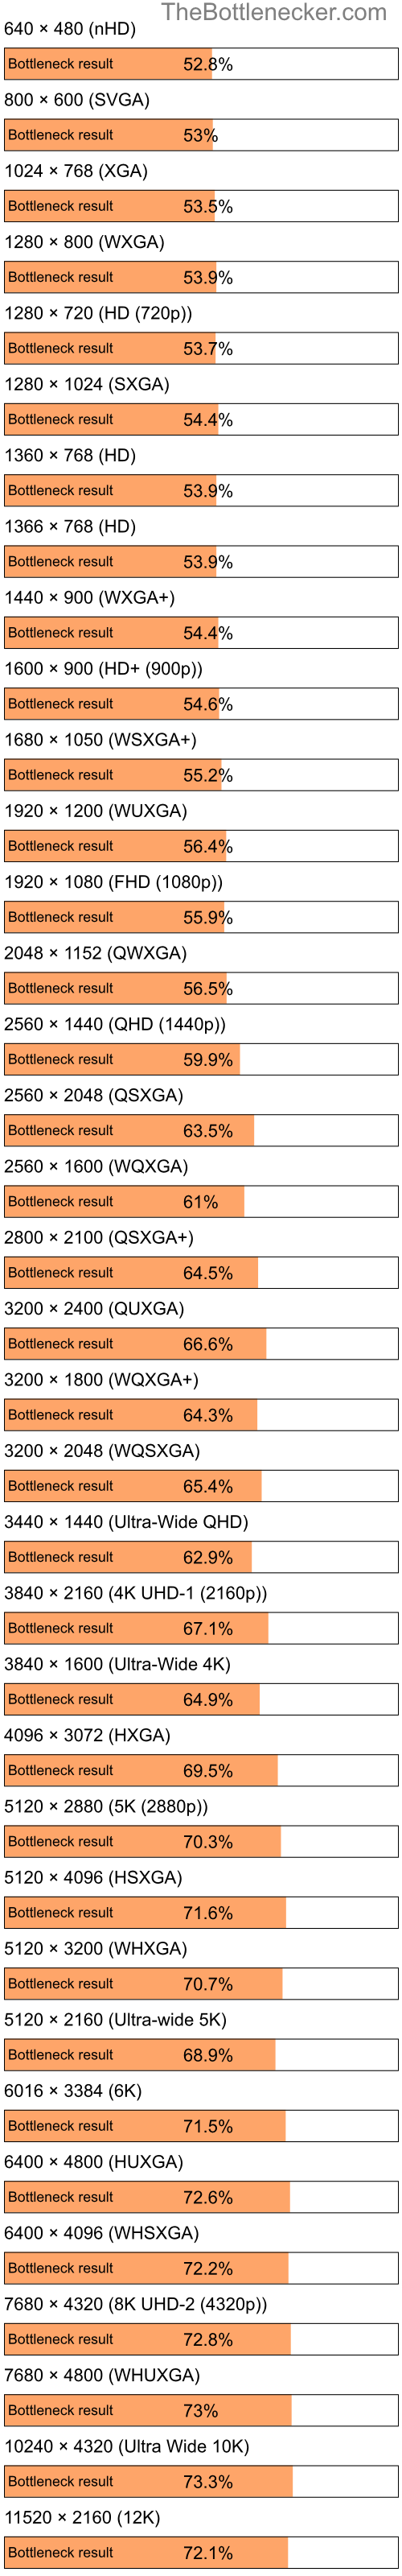 Bottleneck results by resolution for Intel Pentium 4 and AMD Radeon HD 4270 in Processor Intense Tasks